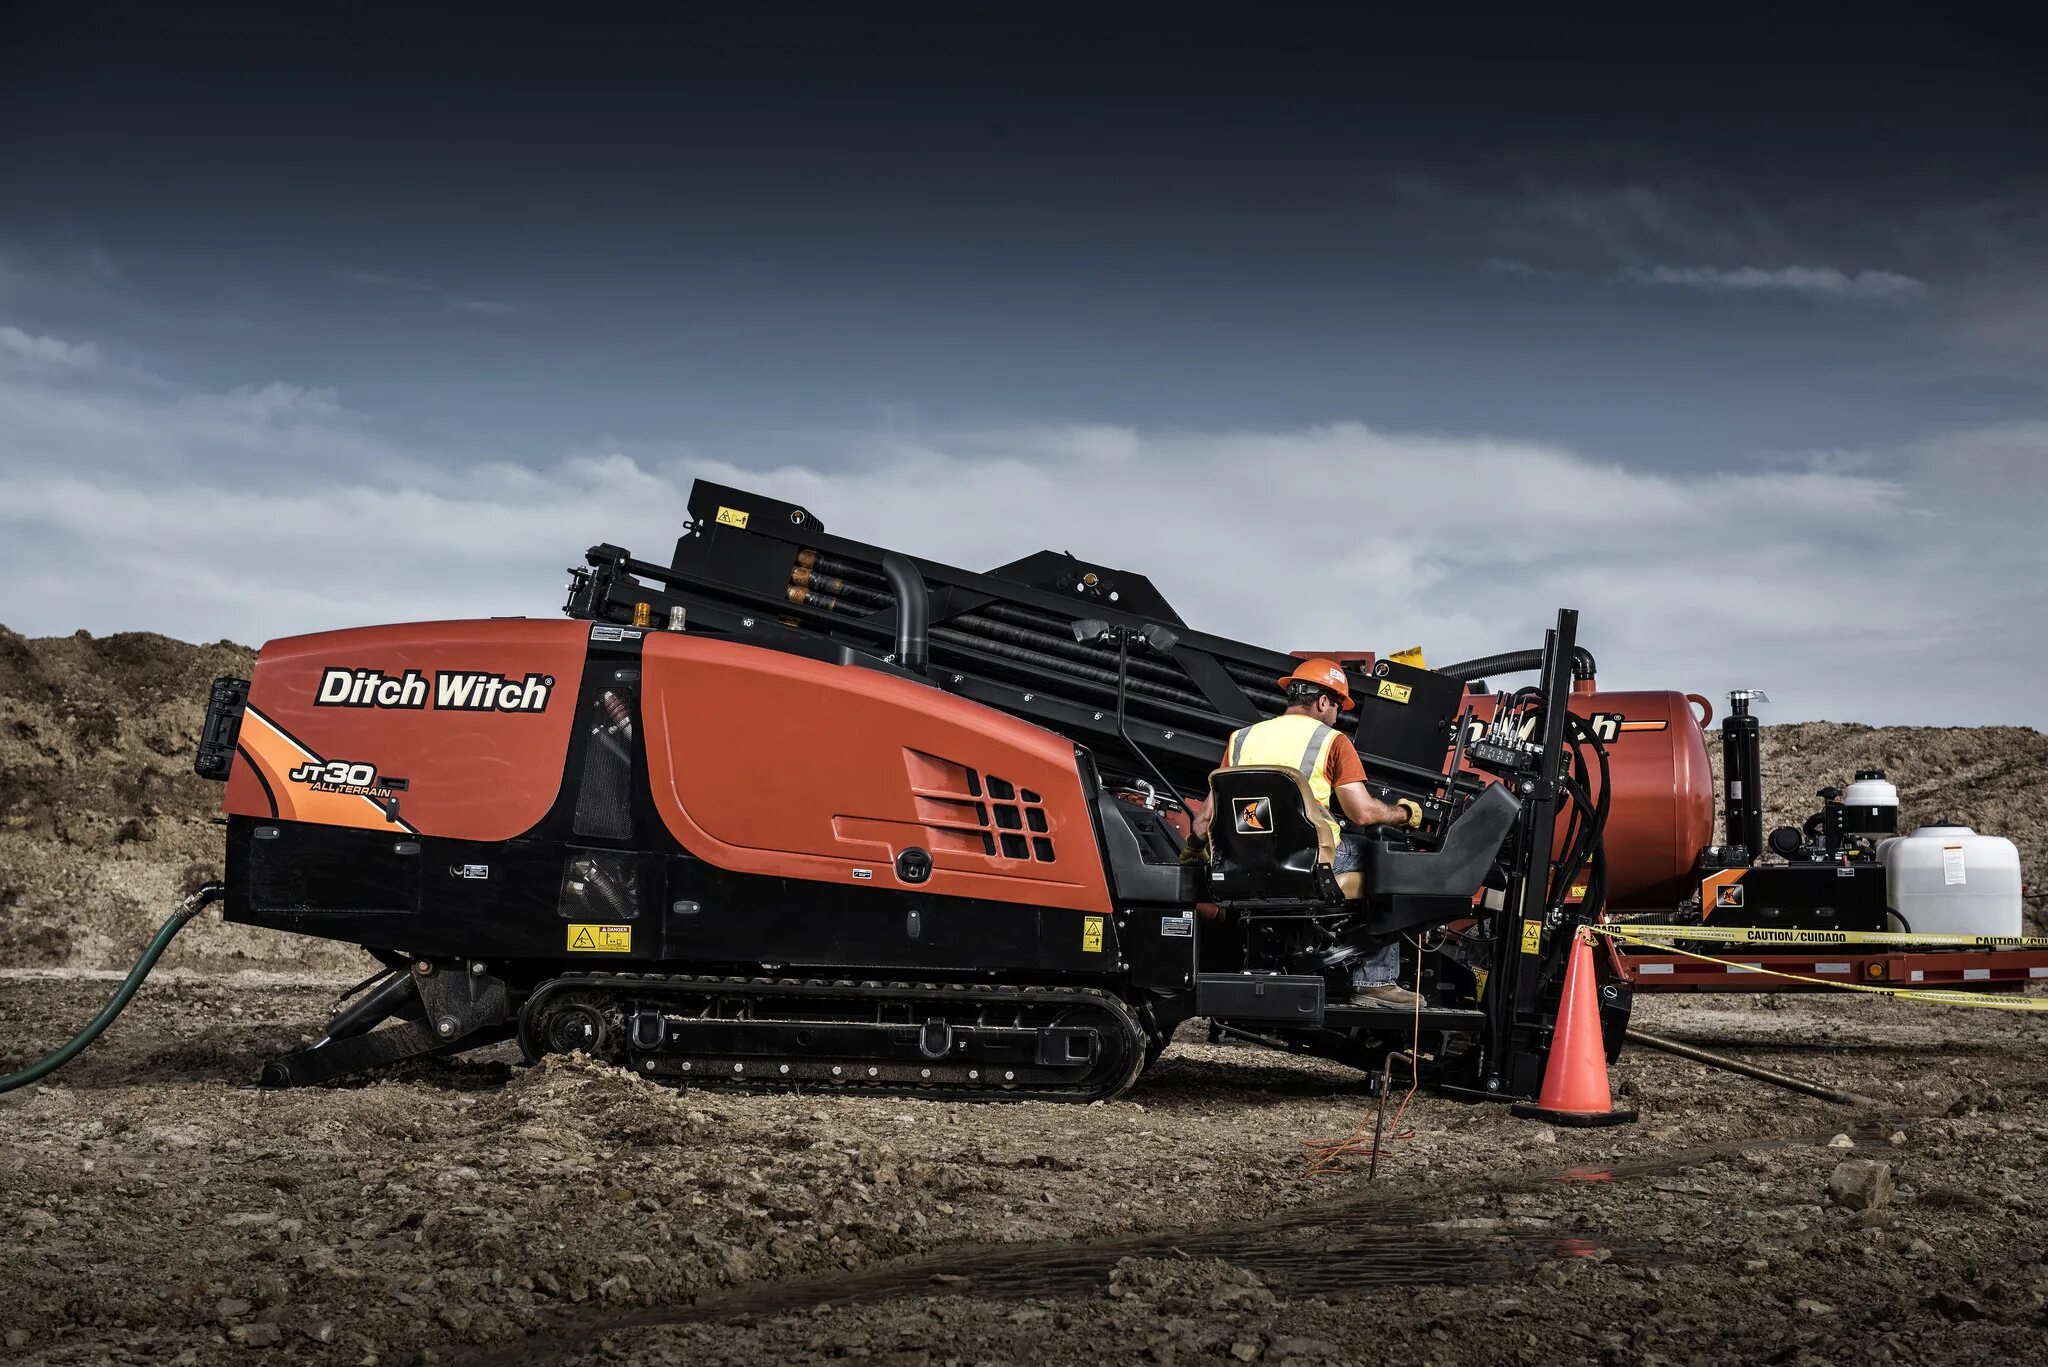 ГНБ ditch Witch. Ditch Witch 3700. Дич ВИЧ ГНБ. Ditch Witch d3 Dana VR 3700 DD Trencher. Стоимость гнб